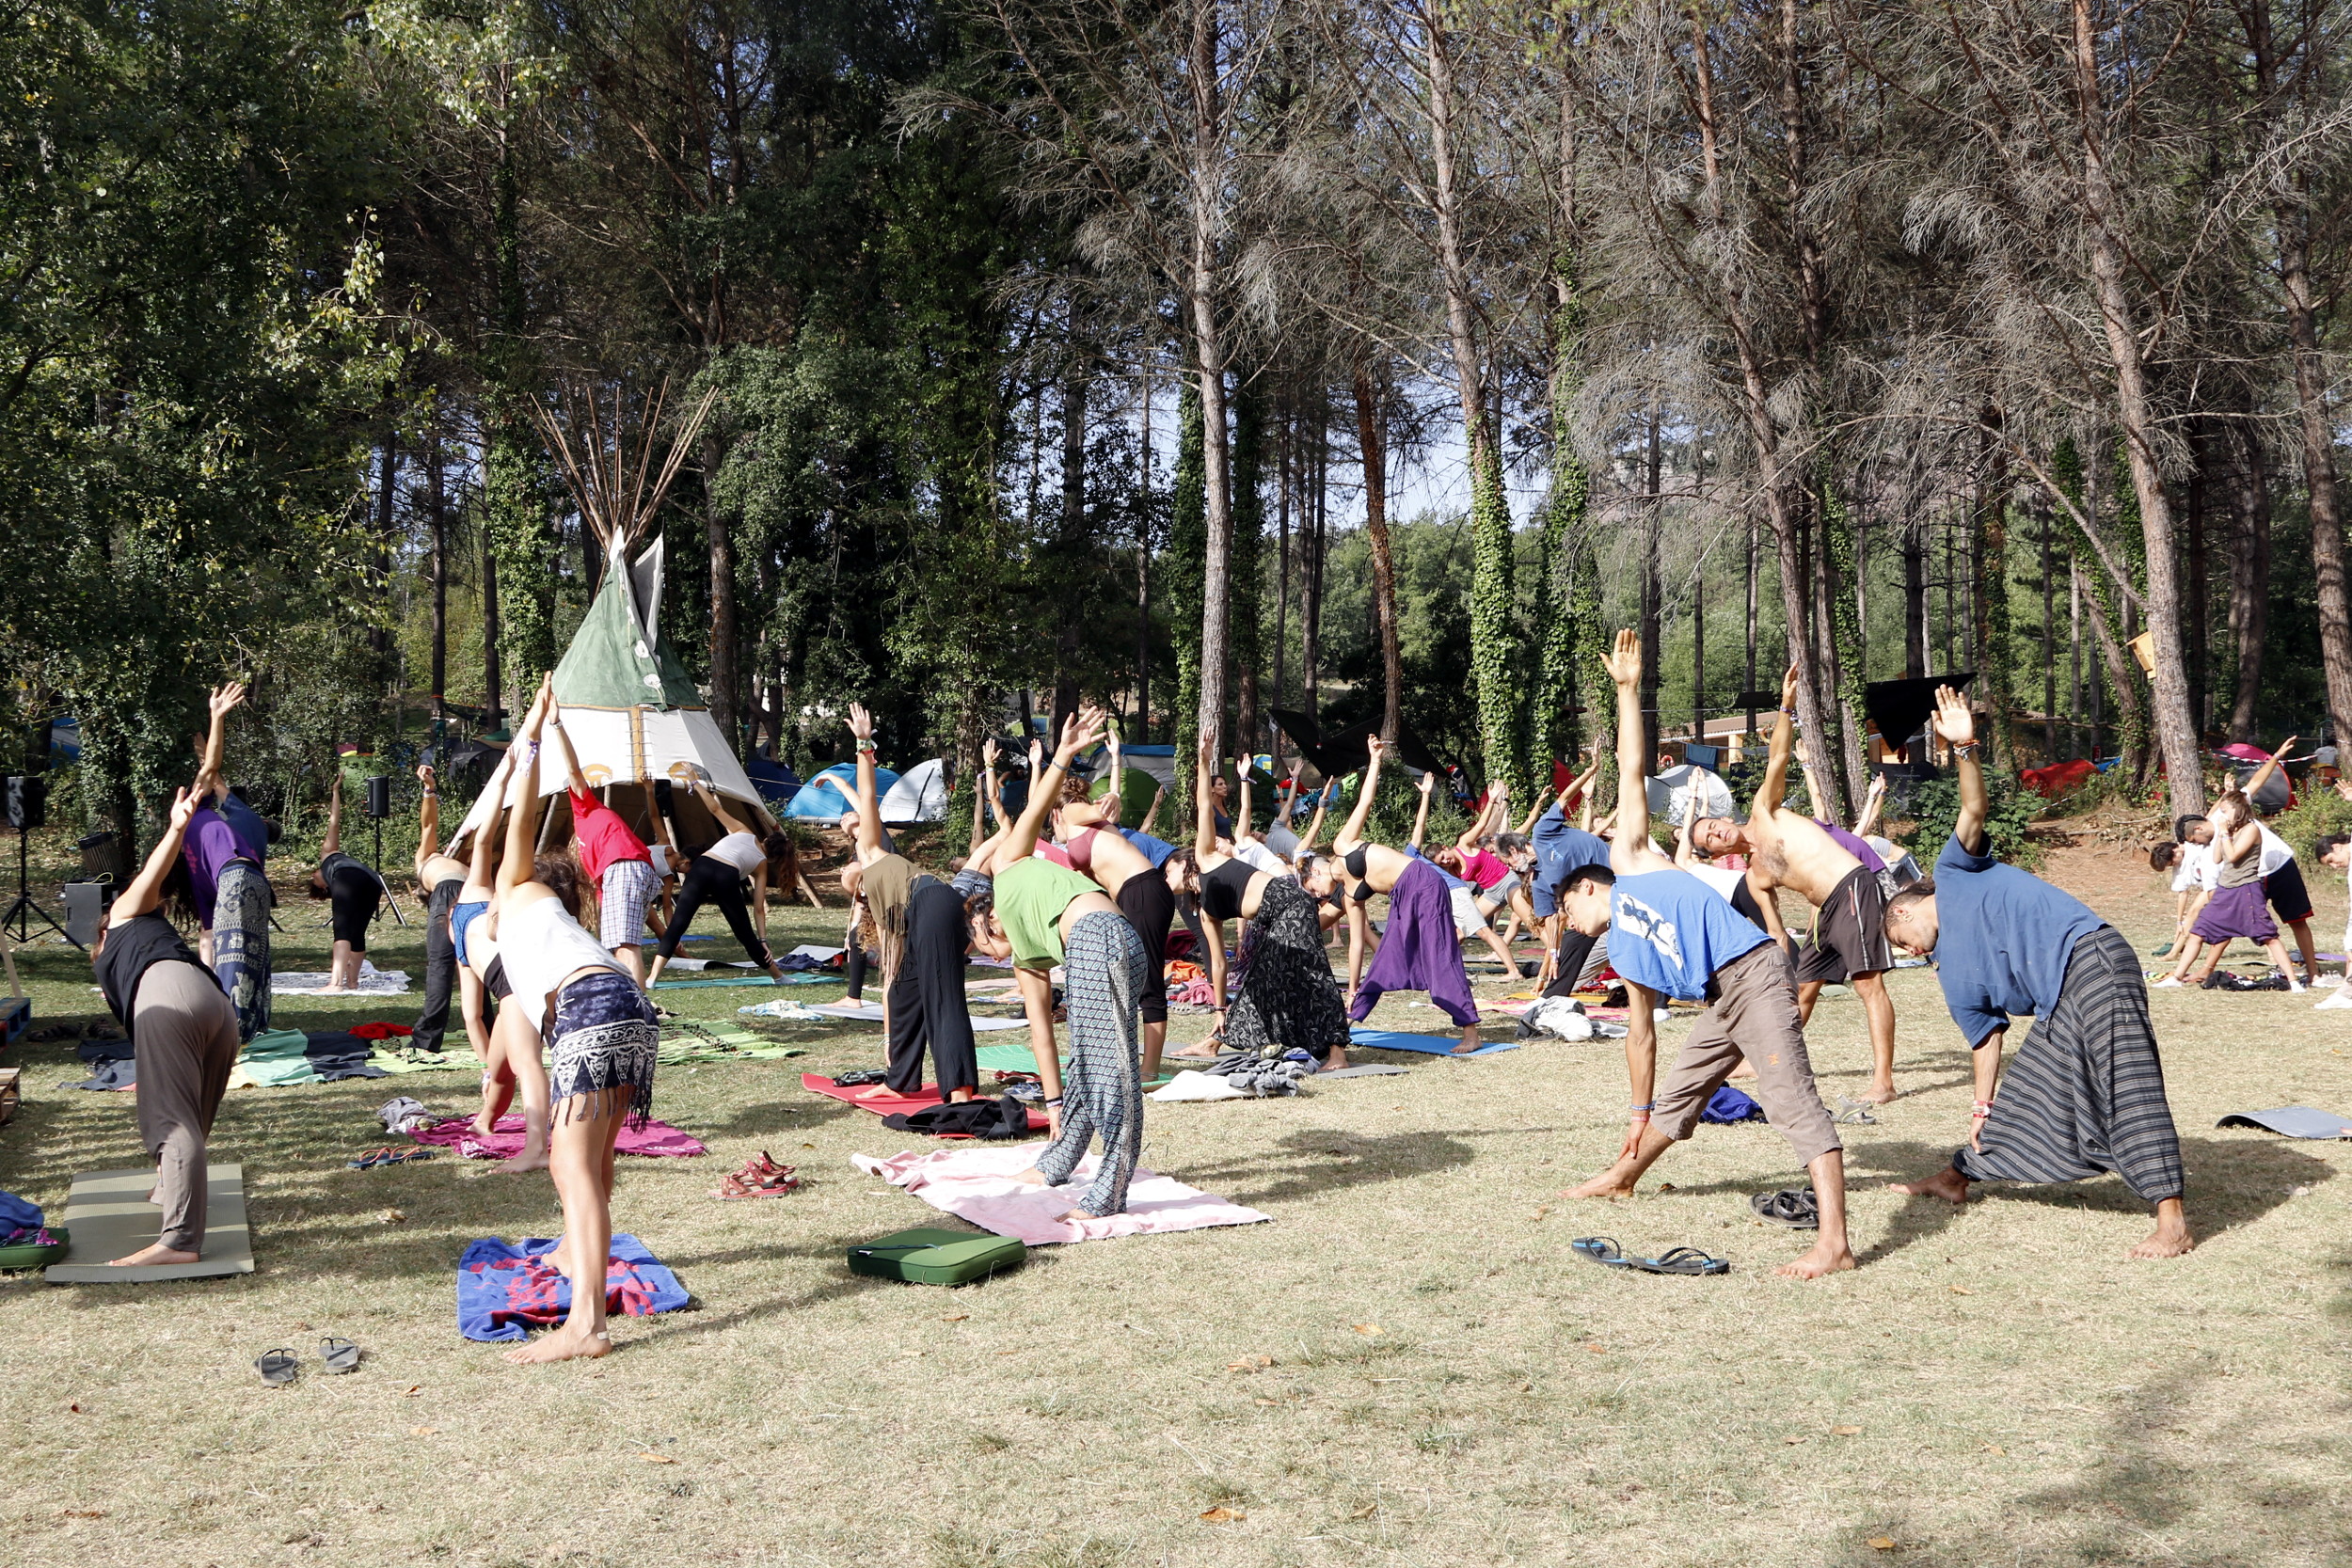 Attendees doing yoga at the BioRitme festival (by ACN)